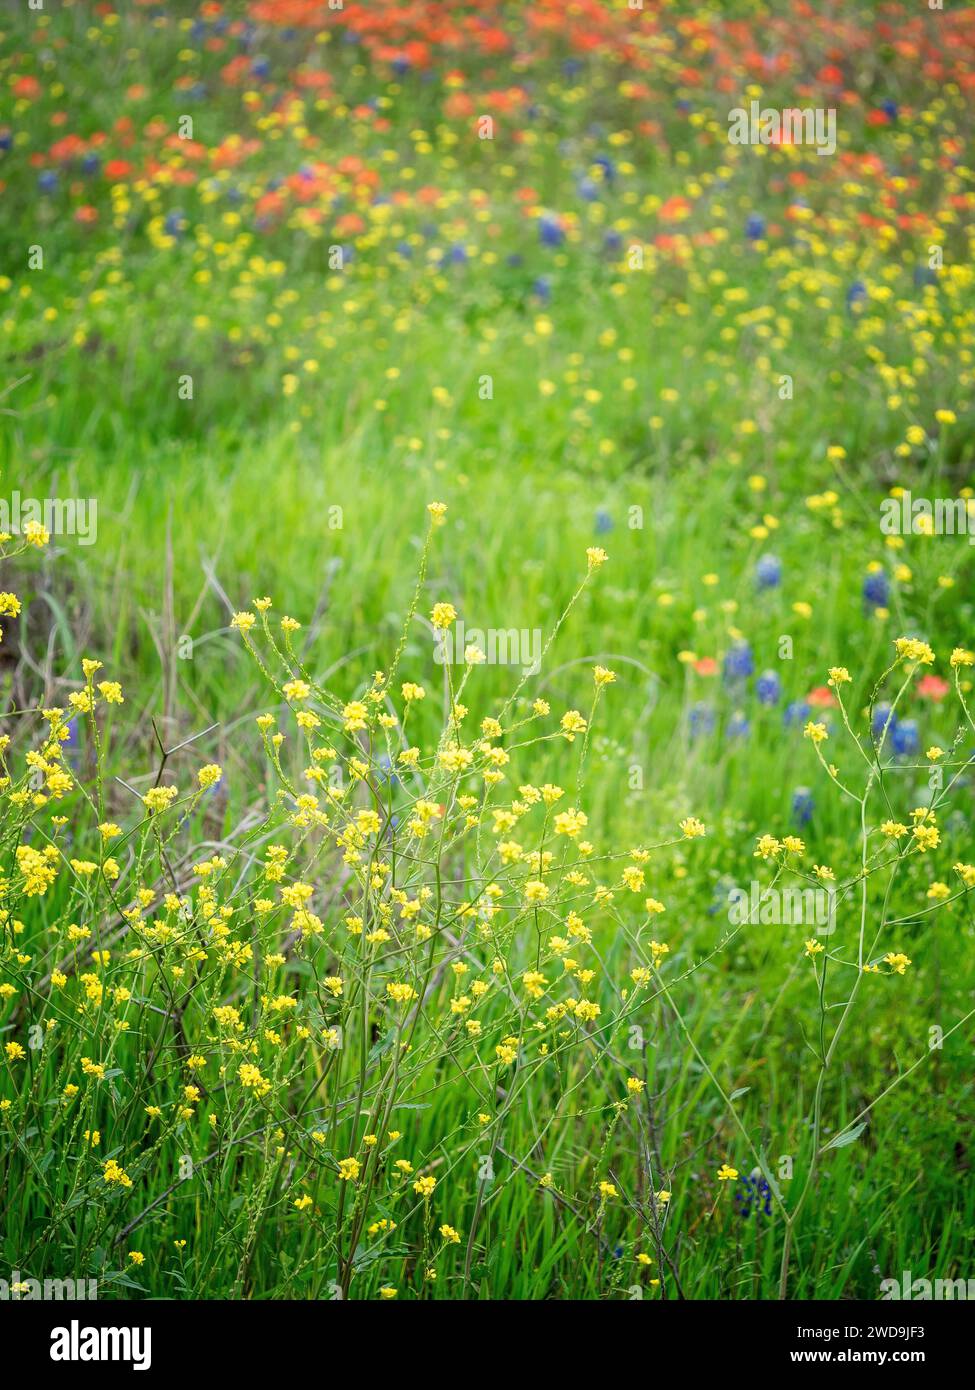 Texas wildflower is blooming in spring time. A wildflower field near a sports complex Dallas, TX Stock Photo